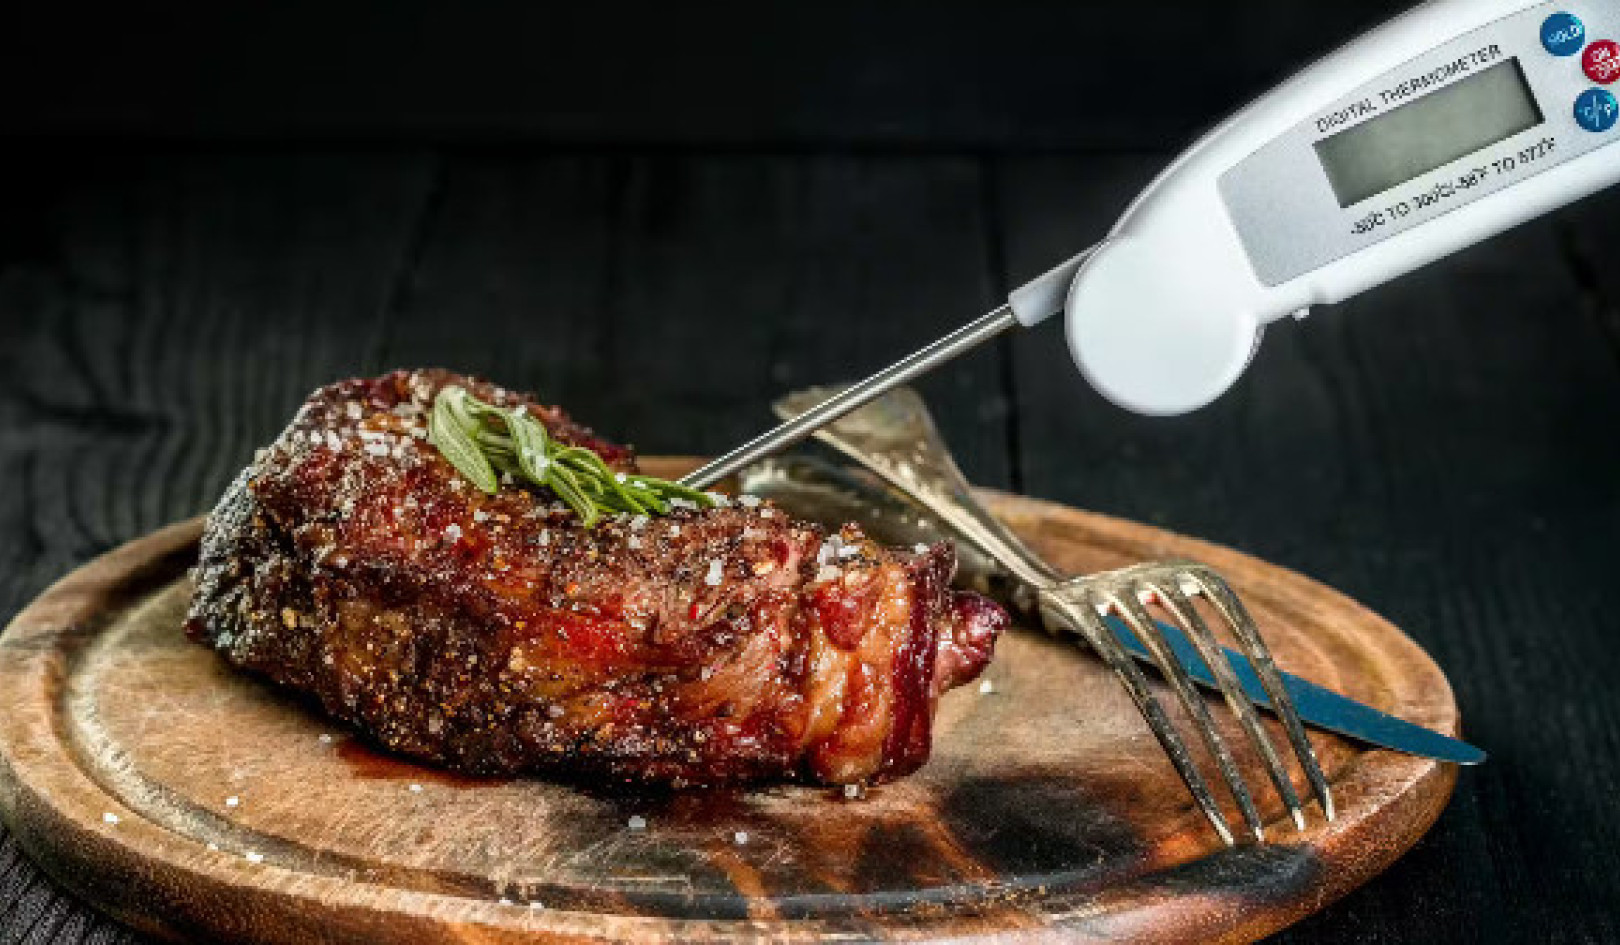 From Roast to Right: Food Thermometer Tips for a Safe Feast